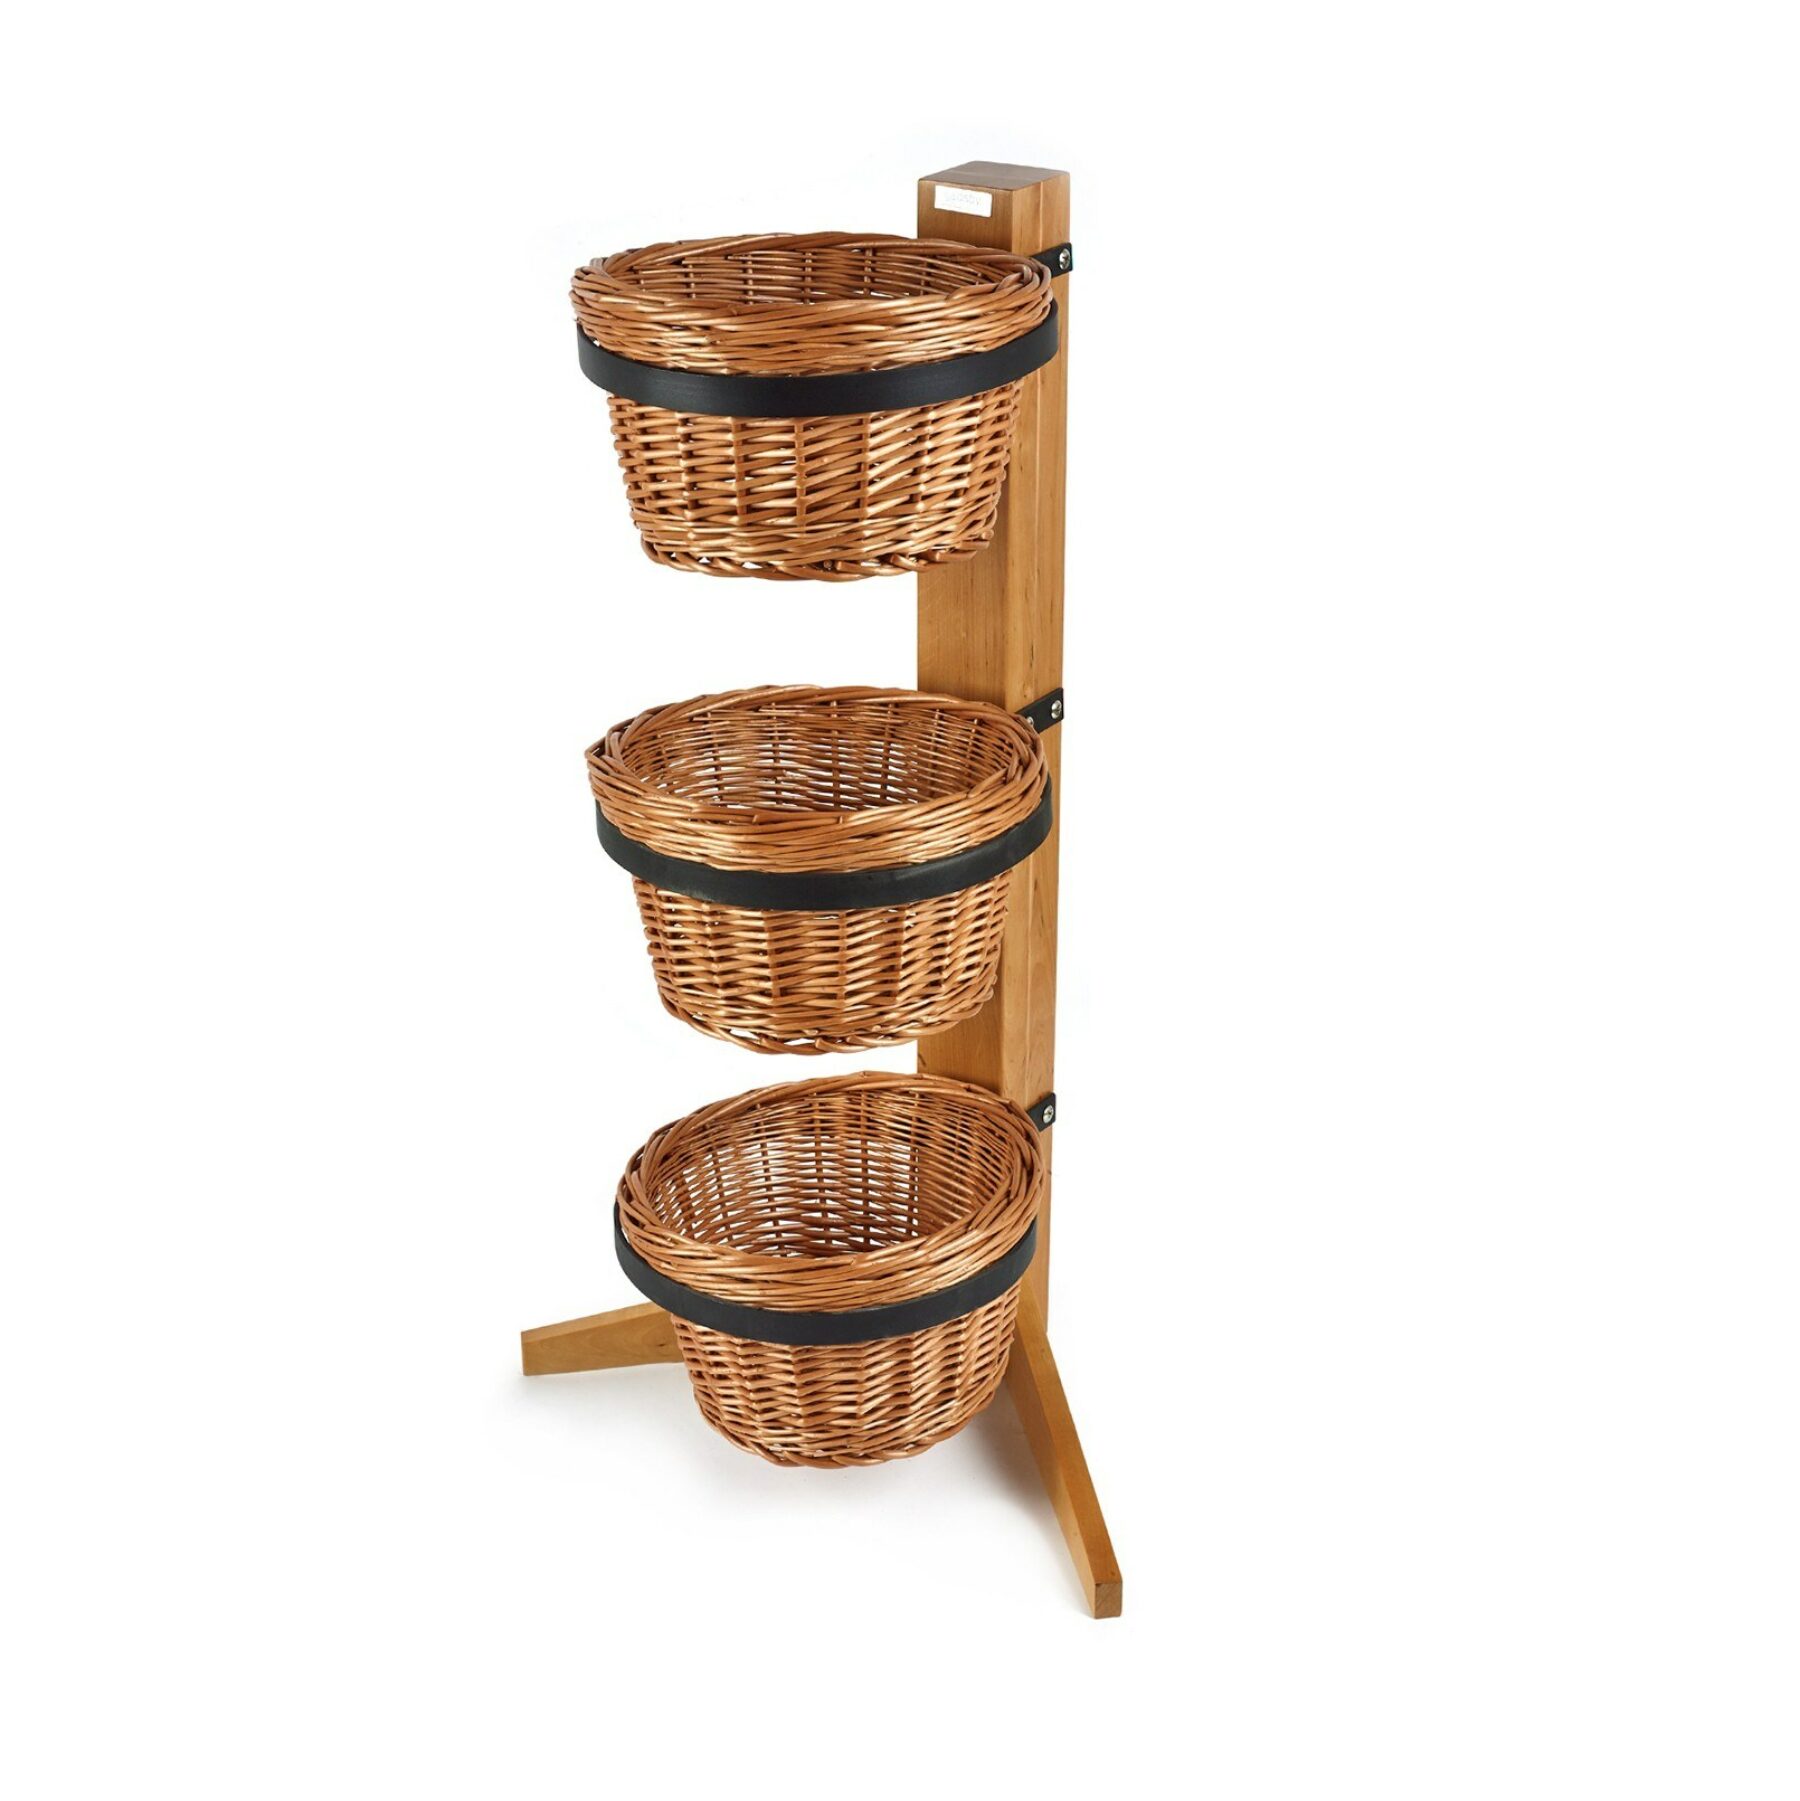 3 Tier Display Stand with Round Baskets